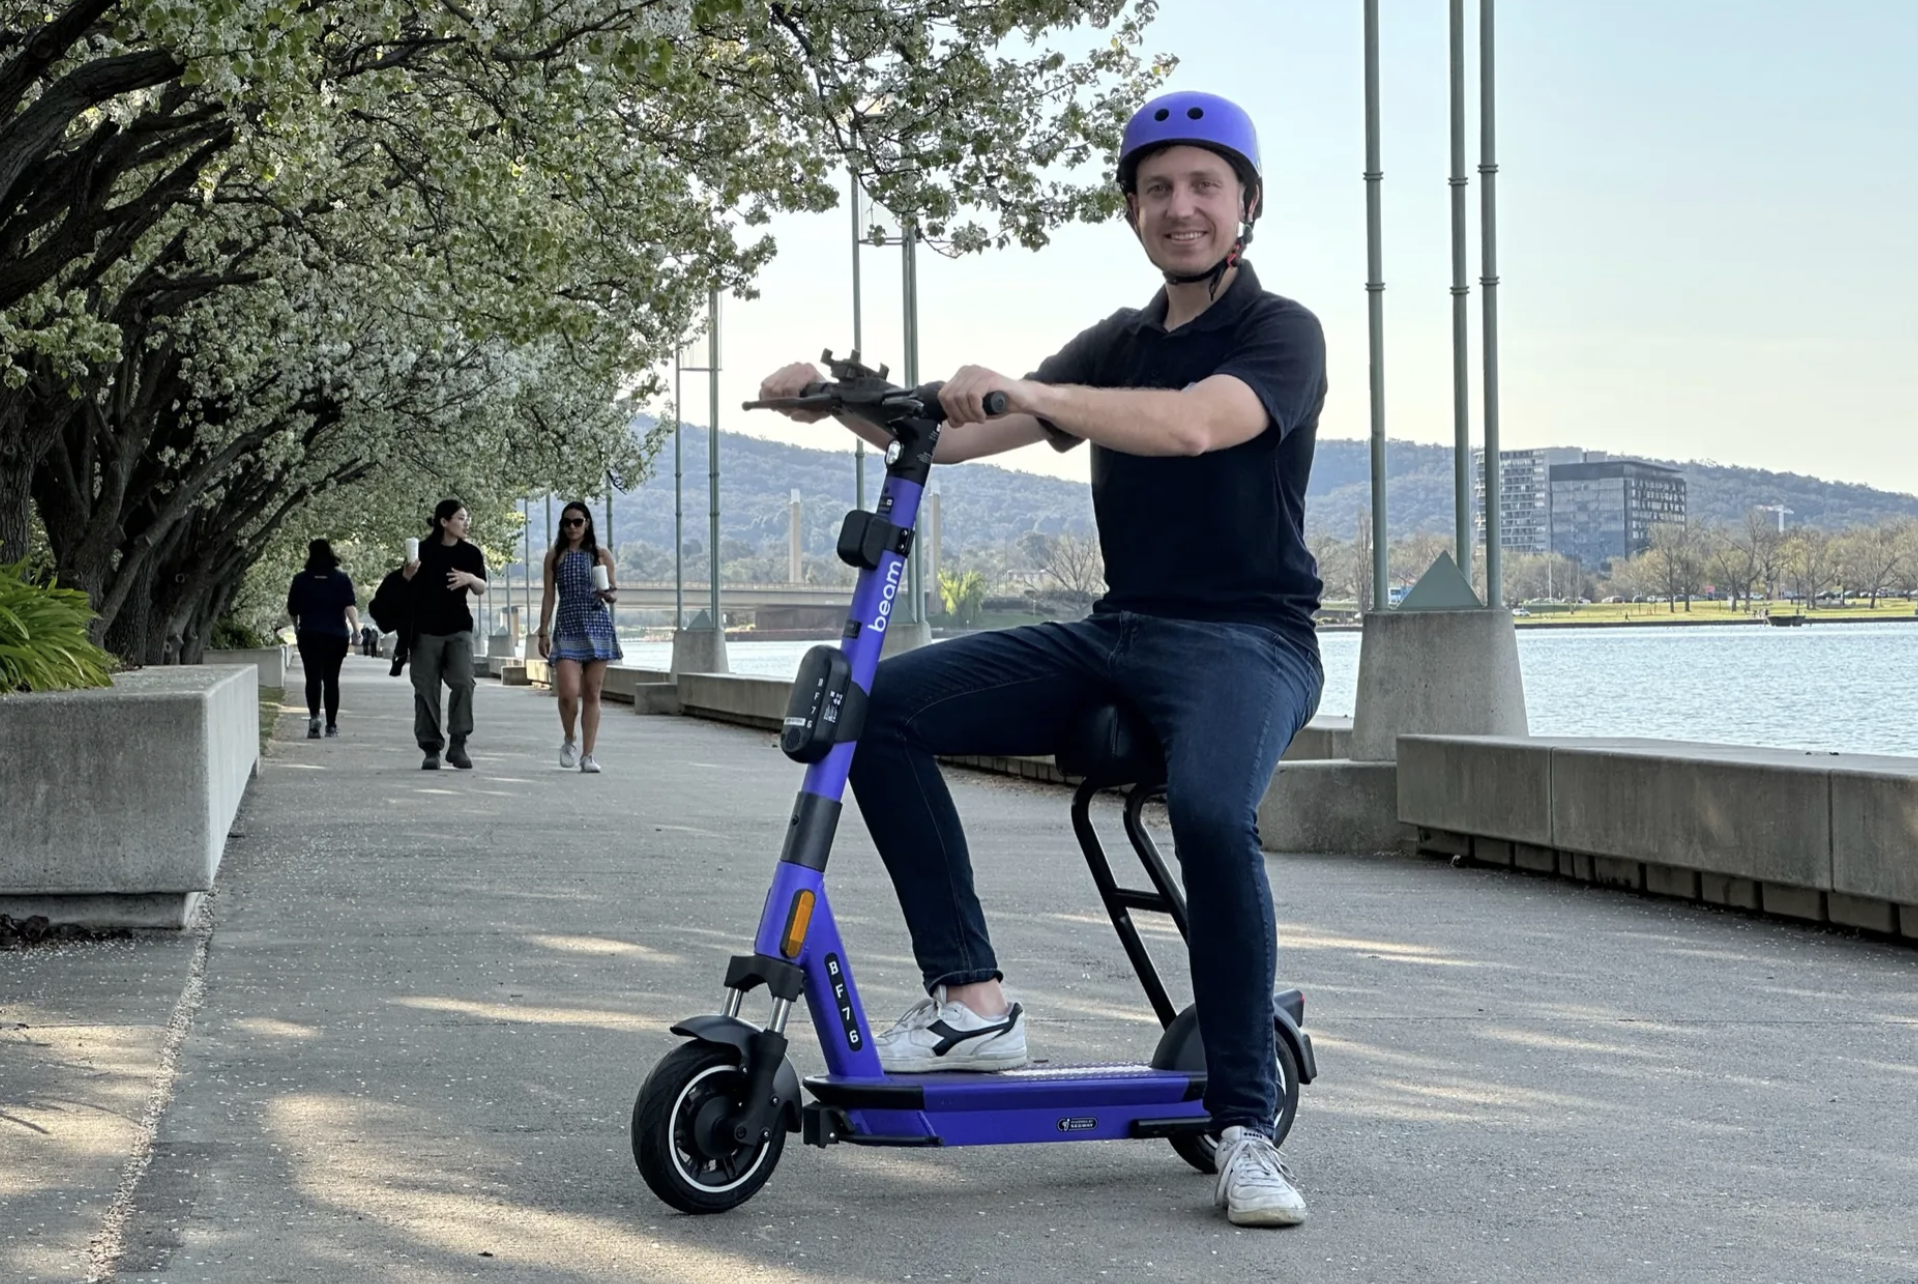 Beam's seated e-scooter